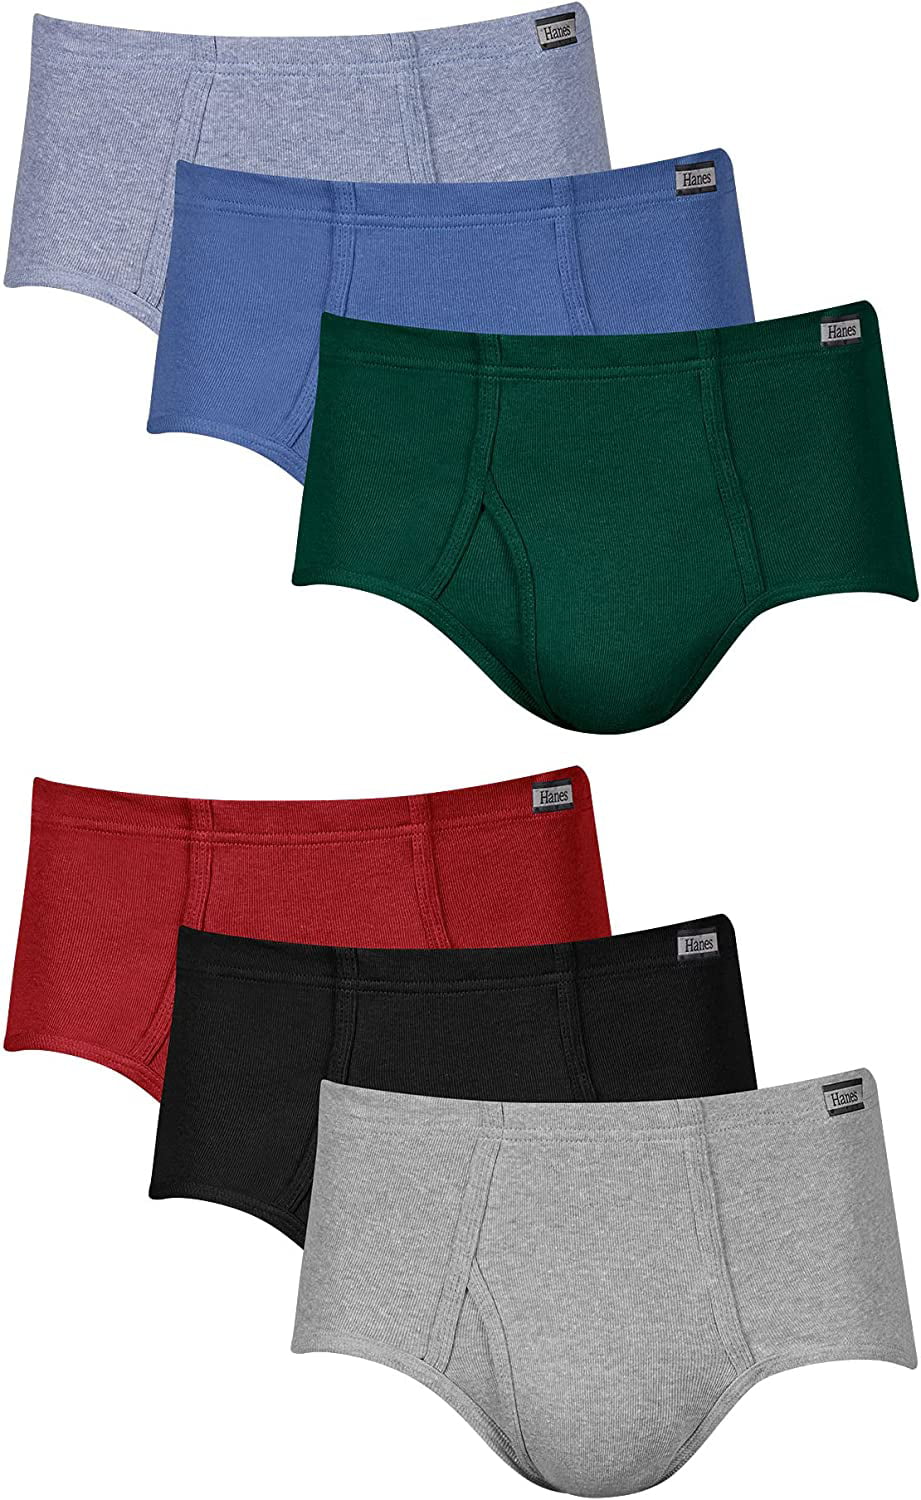 Hanes Men's Tagless® No Ride Up Briefs with Comfort Soft